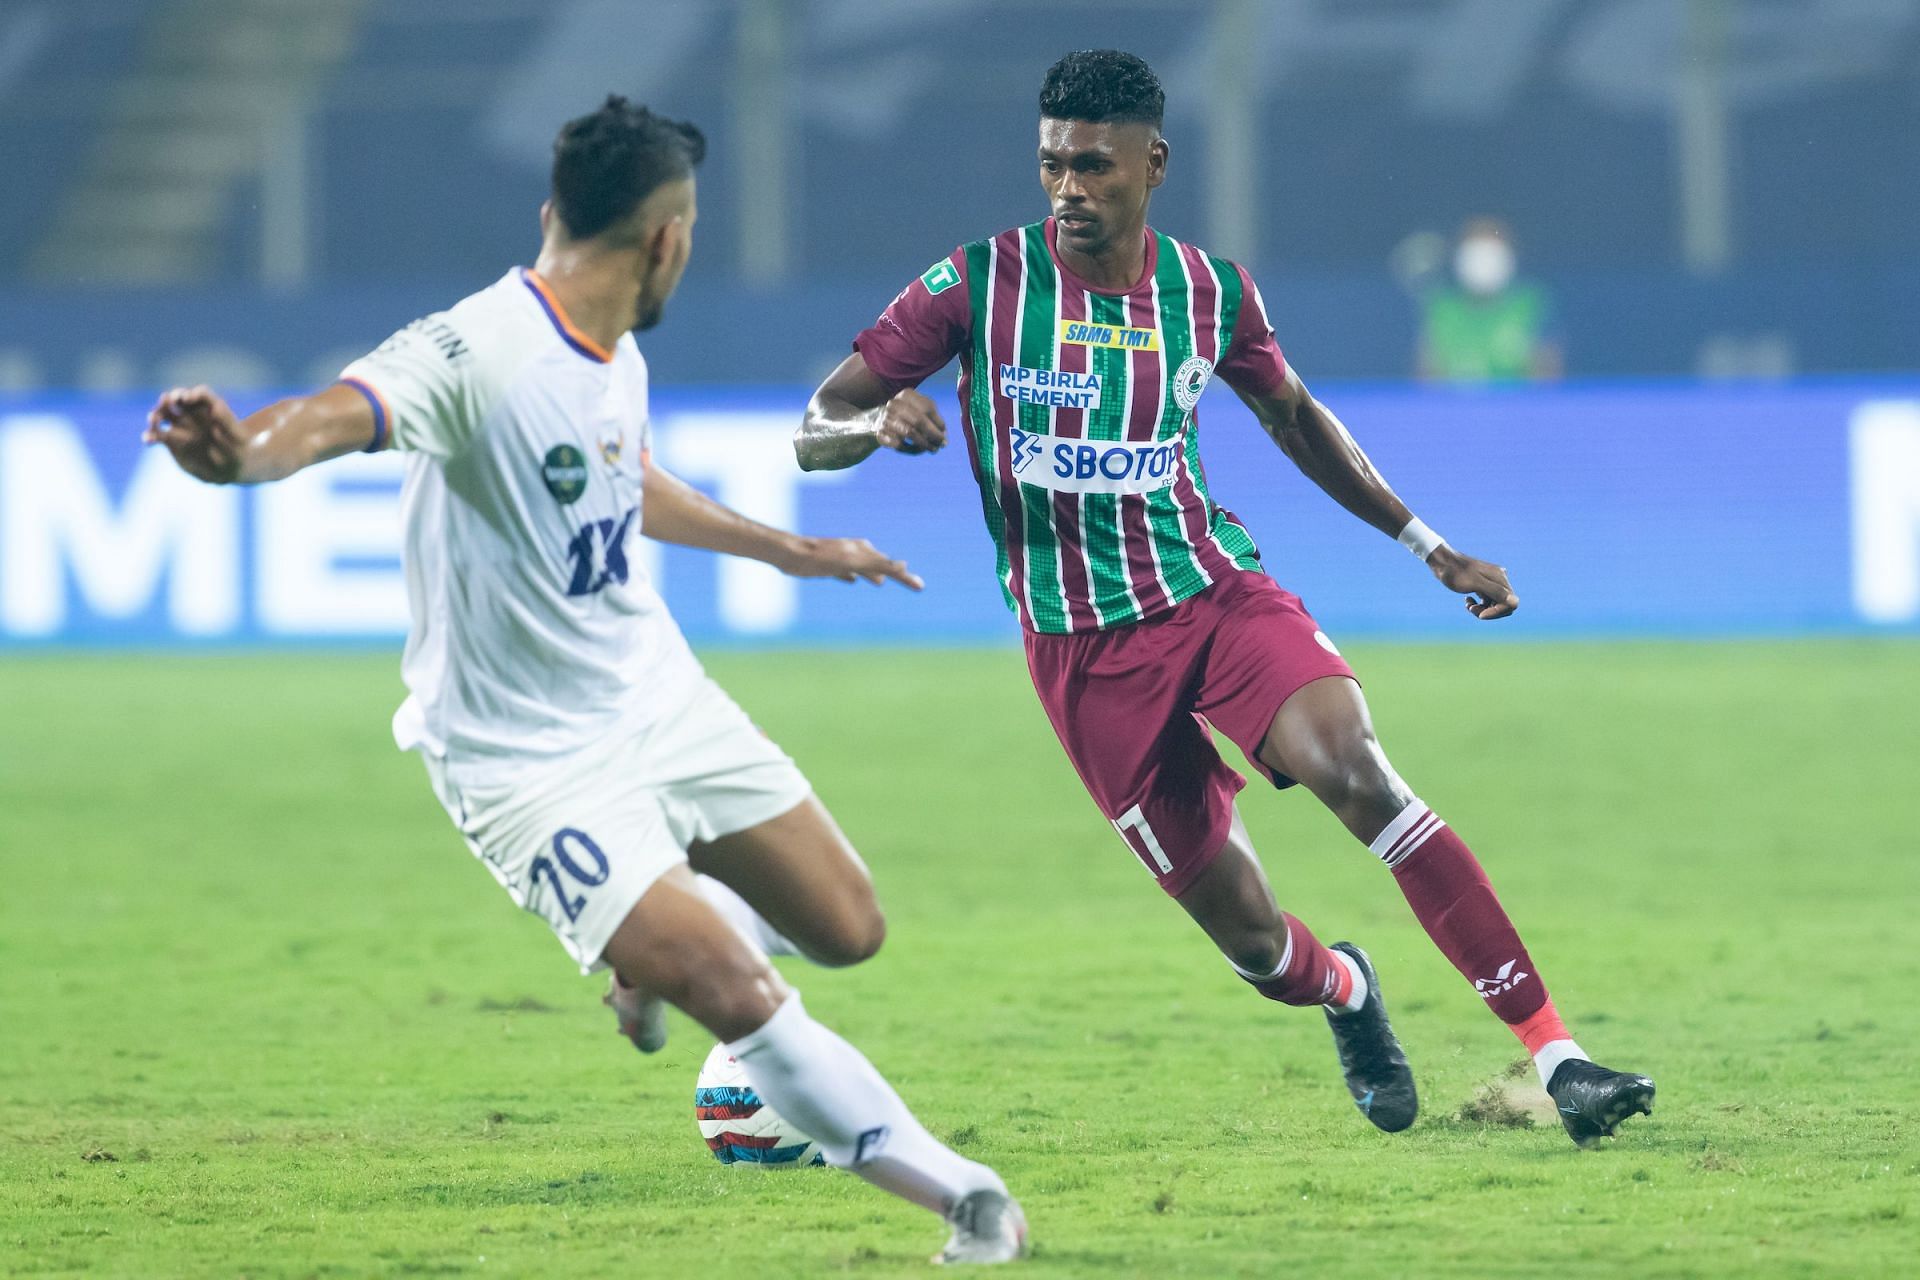 ATK Mohun Bagan&#039;s Liston Colaco who scored a stunner in the last game will face his former side Hyderabad FC (Image Courtesy: ISL)